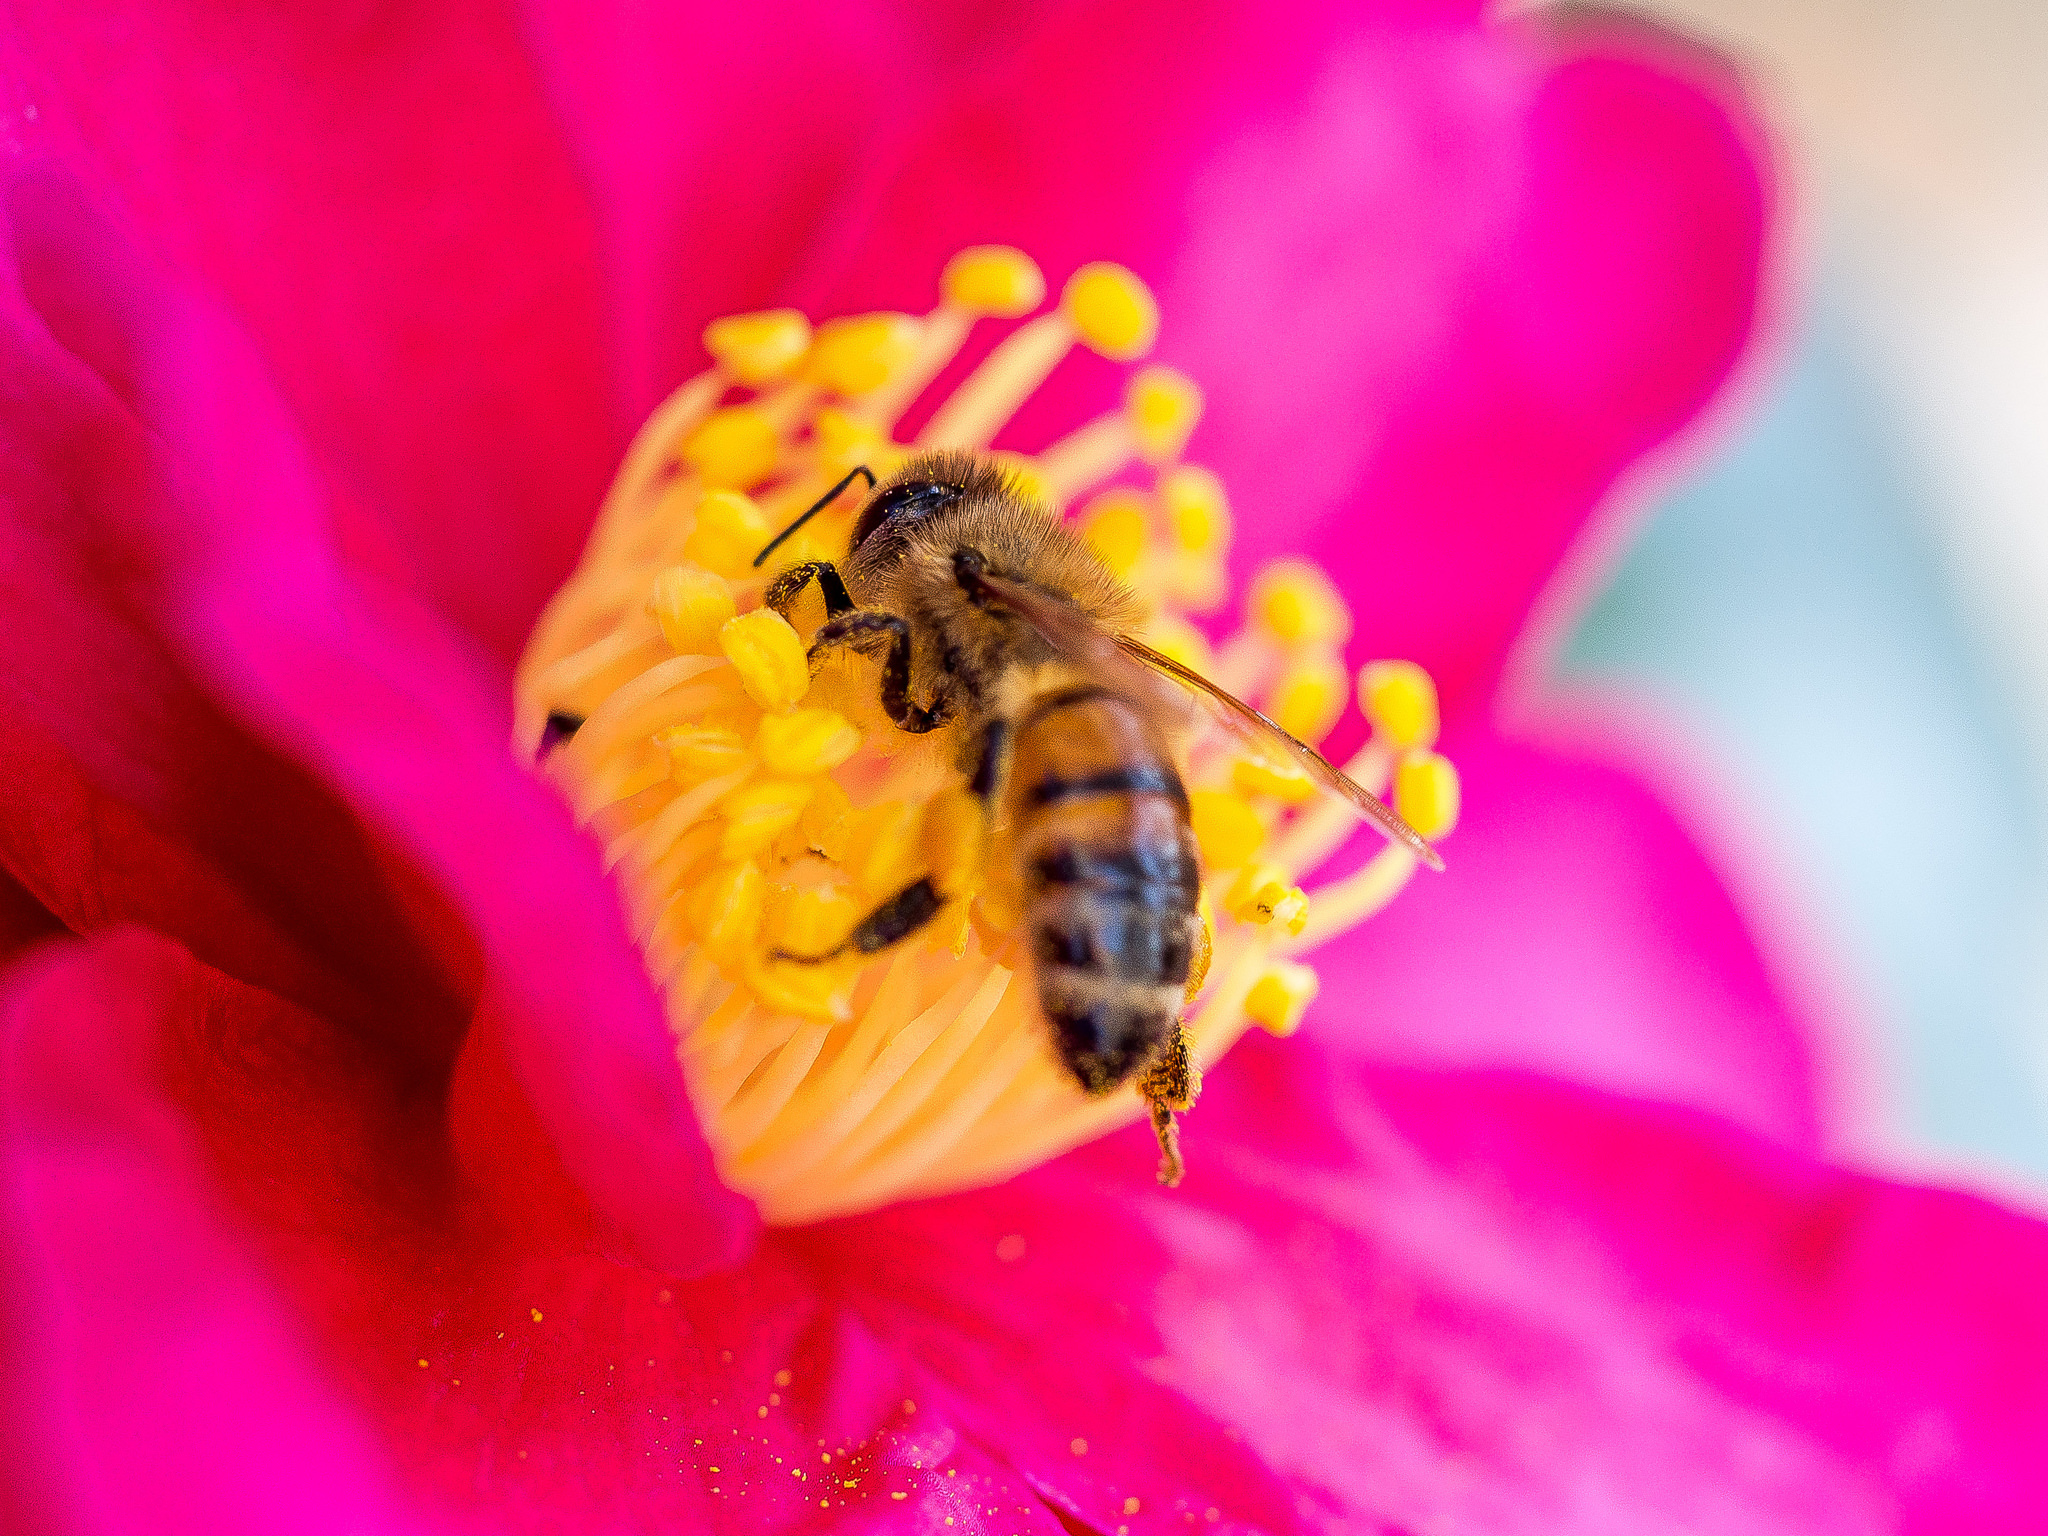 75133 Screensavers and Wallpapers Bee for phone. Download flower, macro, petals, bee, pollen pictures for free